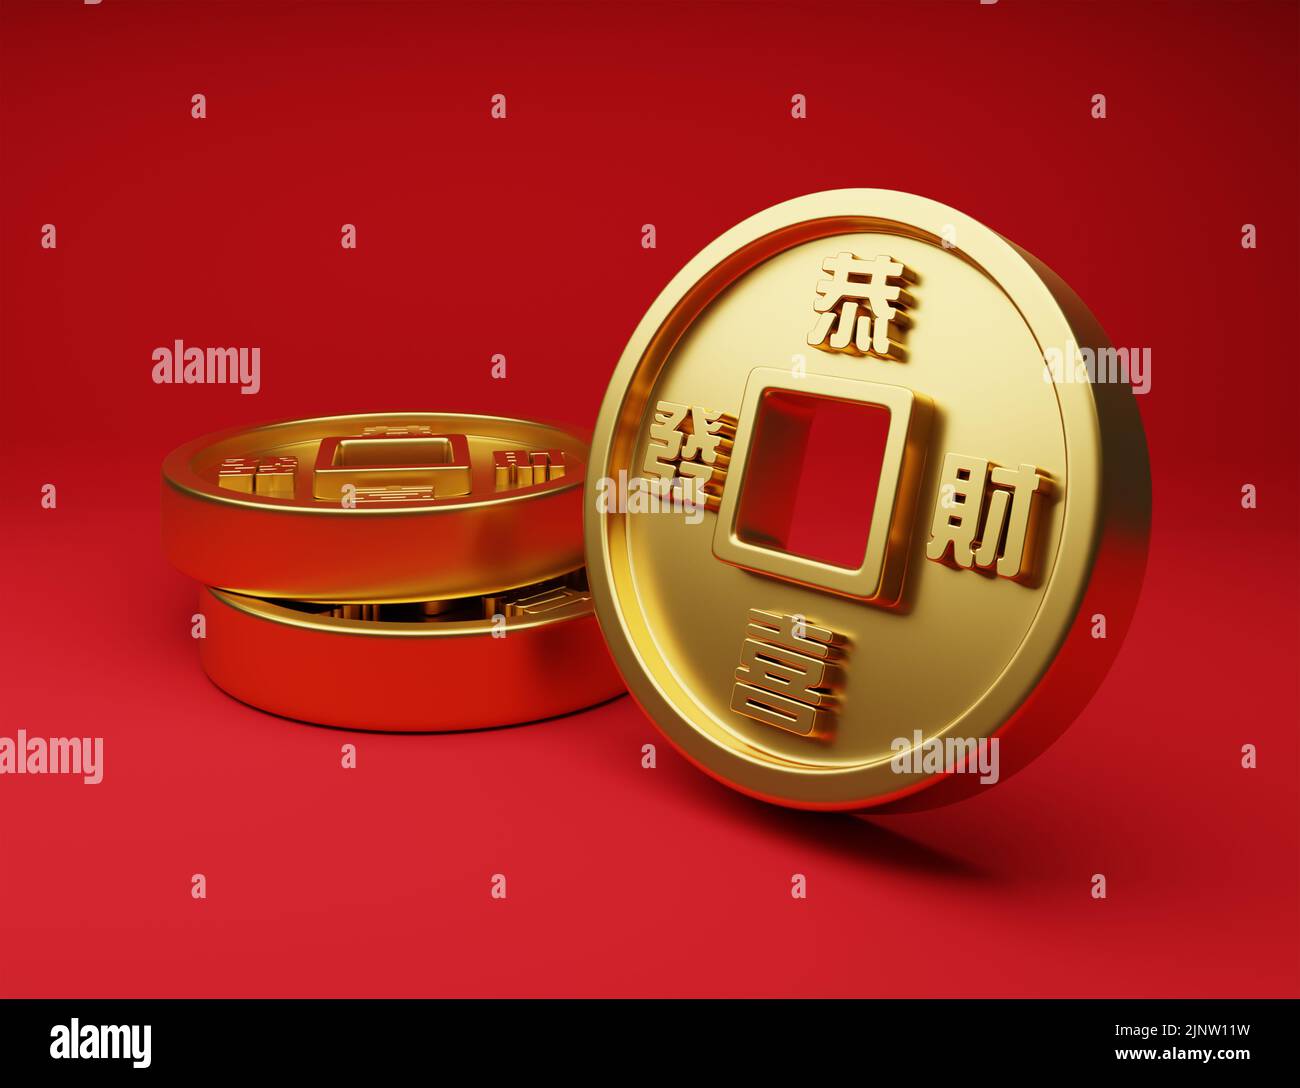 3D illustration realistic ancient gold ingot Chinese coin with square hole in centre for asian festival use on red background. Translate: May you have Stock Photo